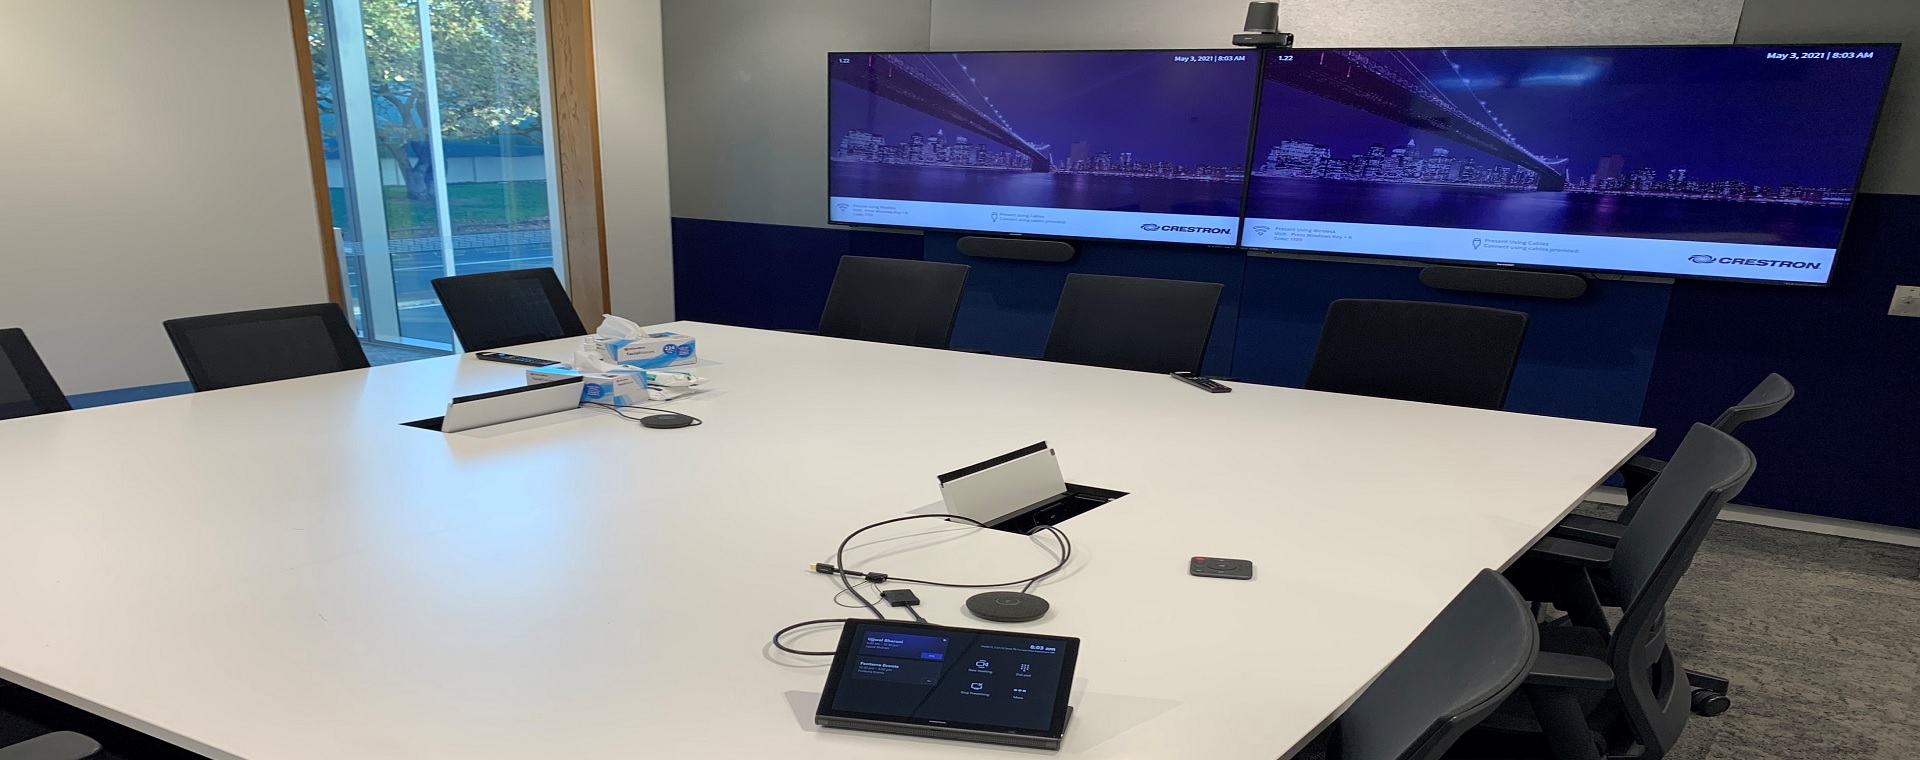 Large Fonterra meeting room with 2 large format displays and a control panel on the desk